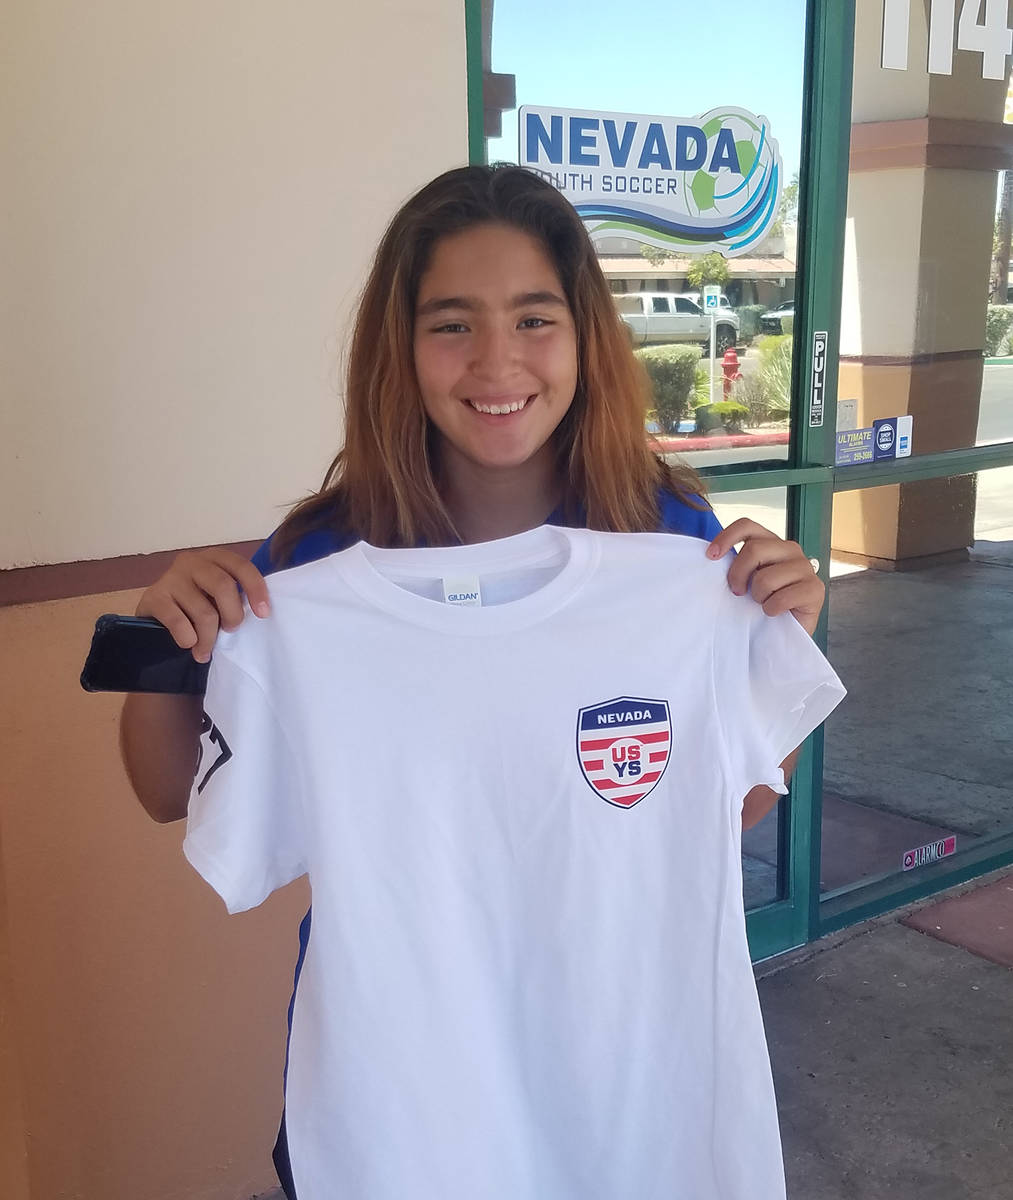 Danny Coleman/Special to the Pahrump Valley Times Pahrump resident Paris Coleman shows off her ...